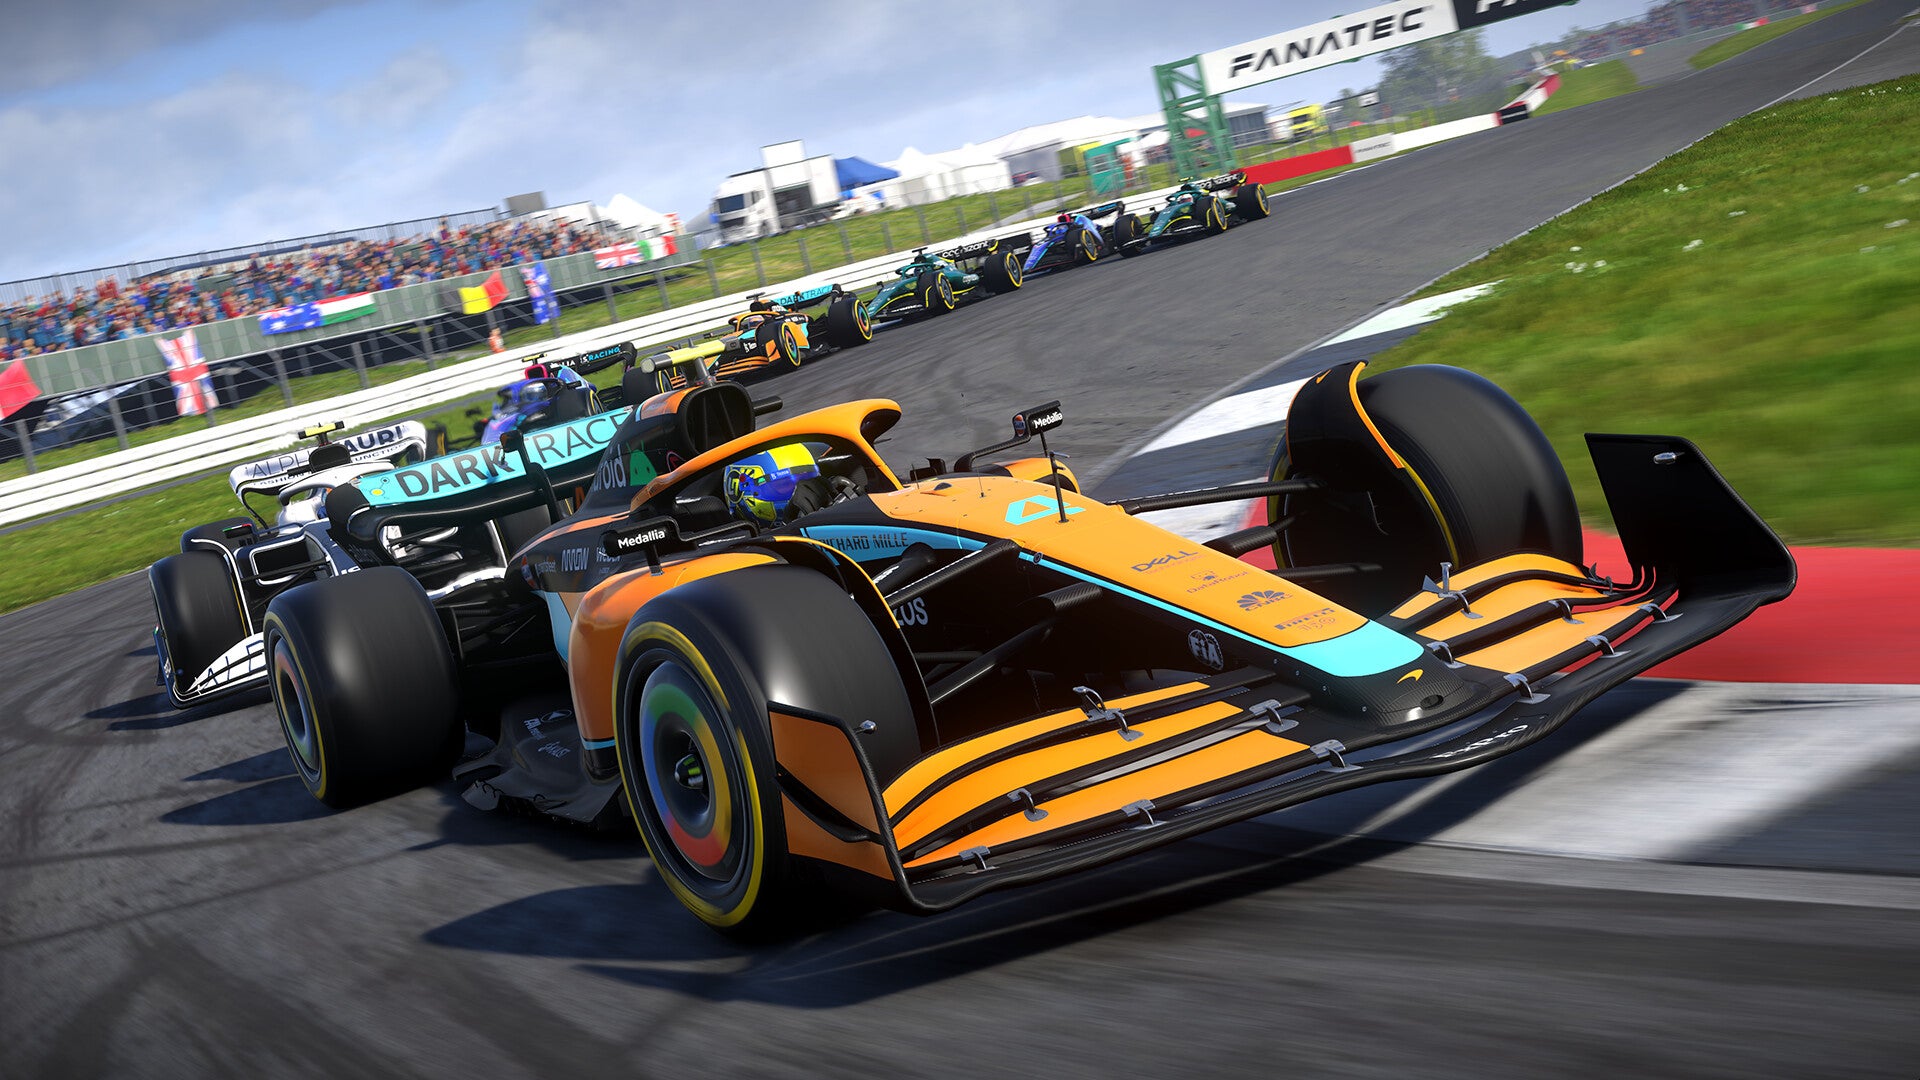 An F1 22 screenshot showing the race leader narrowly leading the pack at Silverstone.